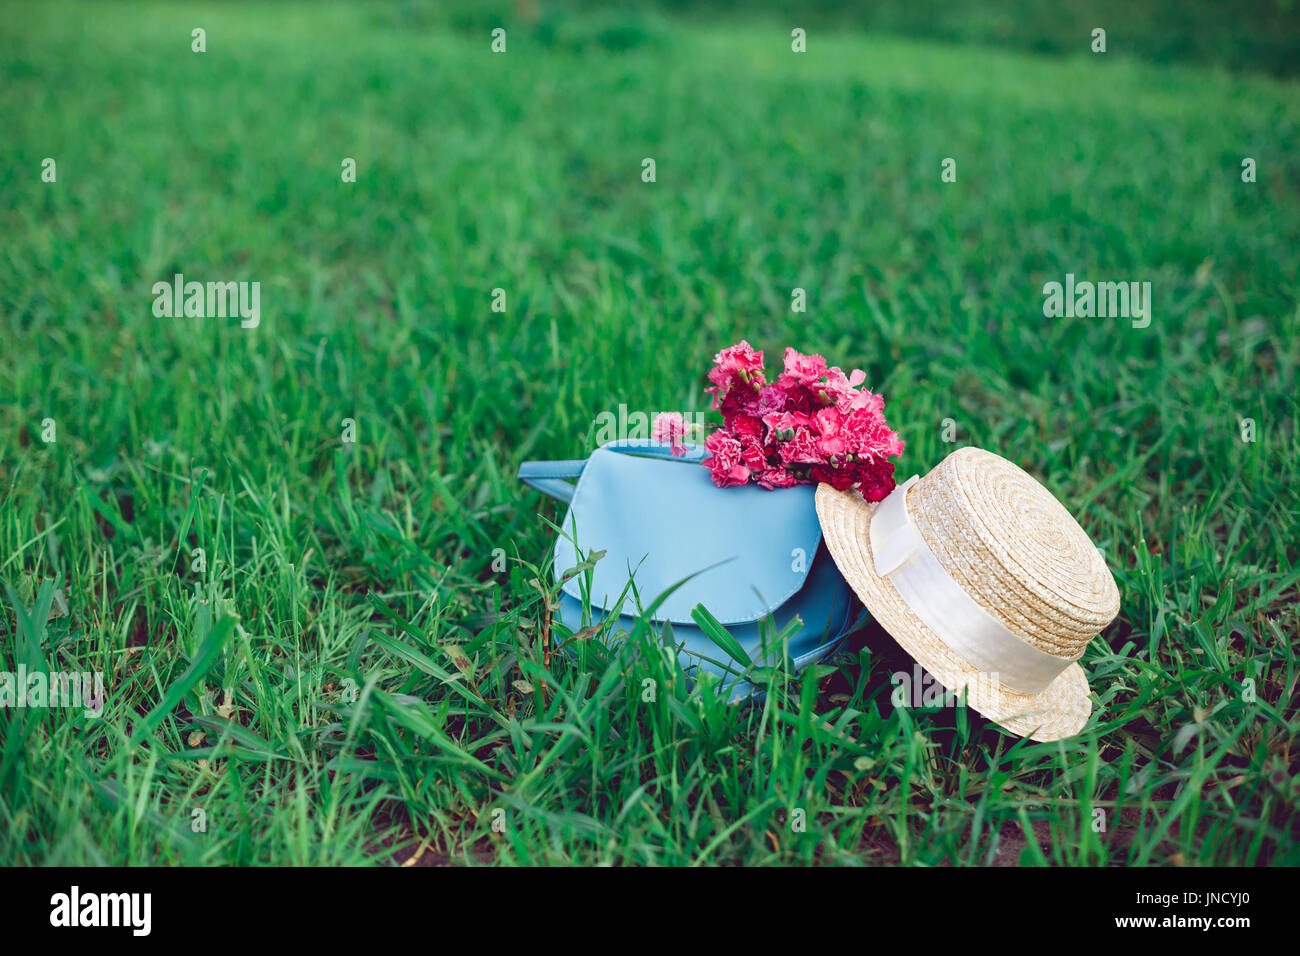 Straw hat and romantic wild-flower bunch bouquet on green grass lawn. Stock Photo